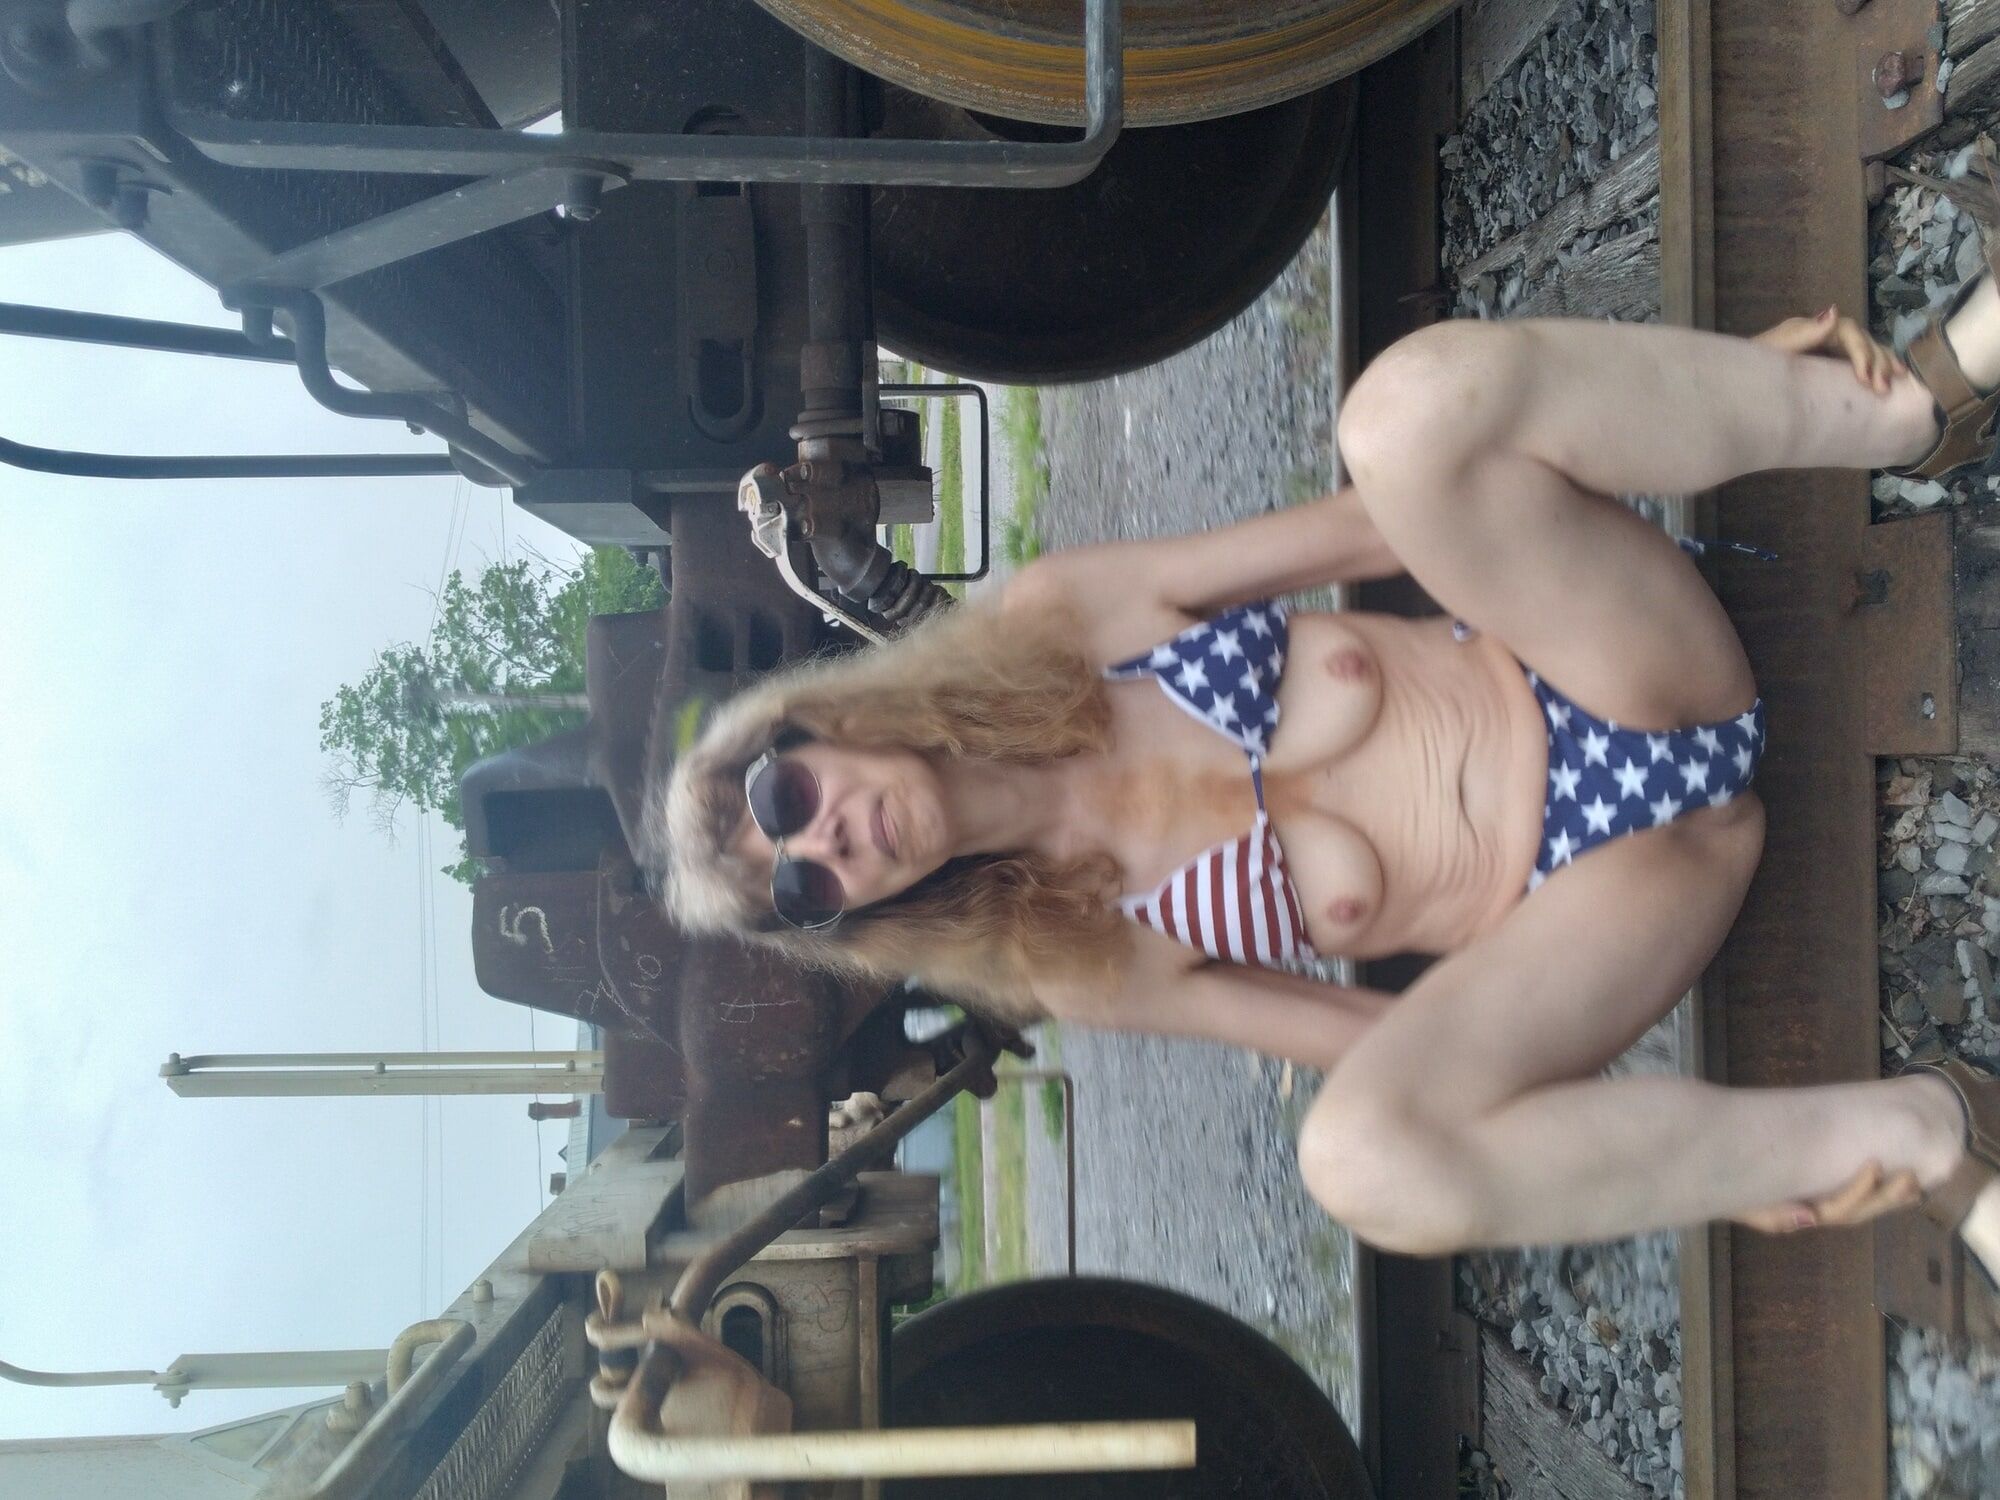 American Train. July 4th release. My best photo set to date. #9